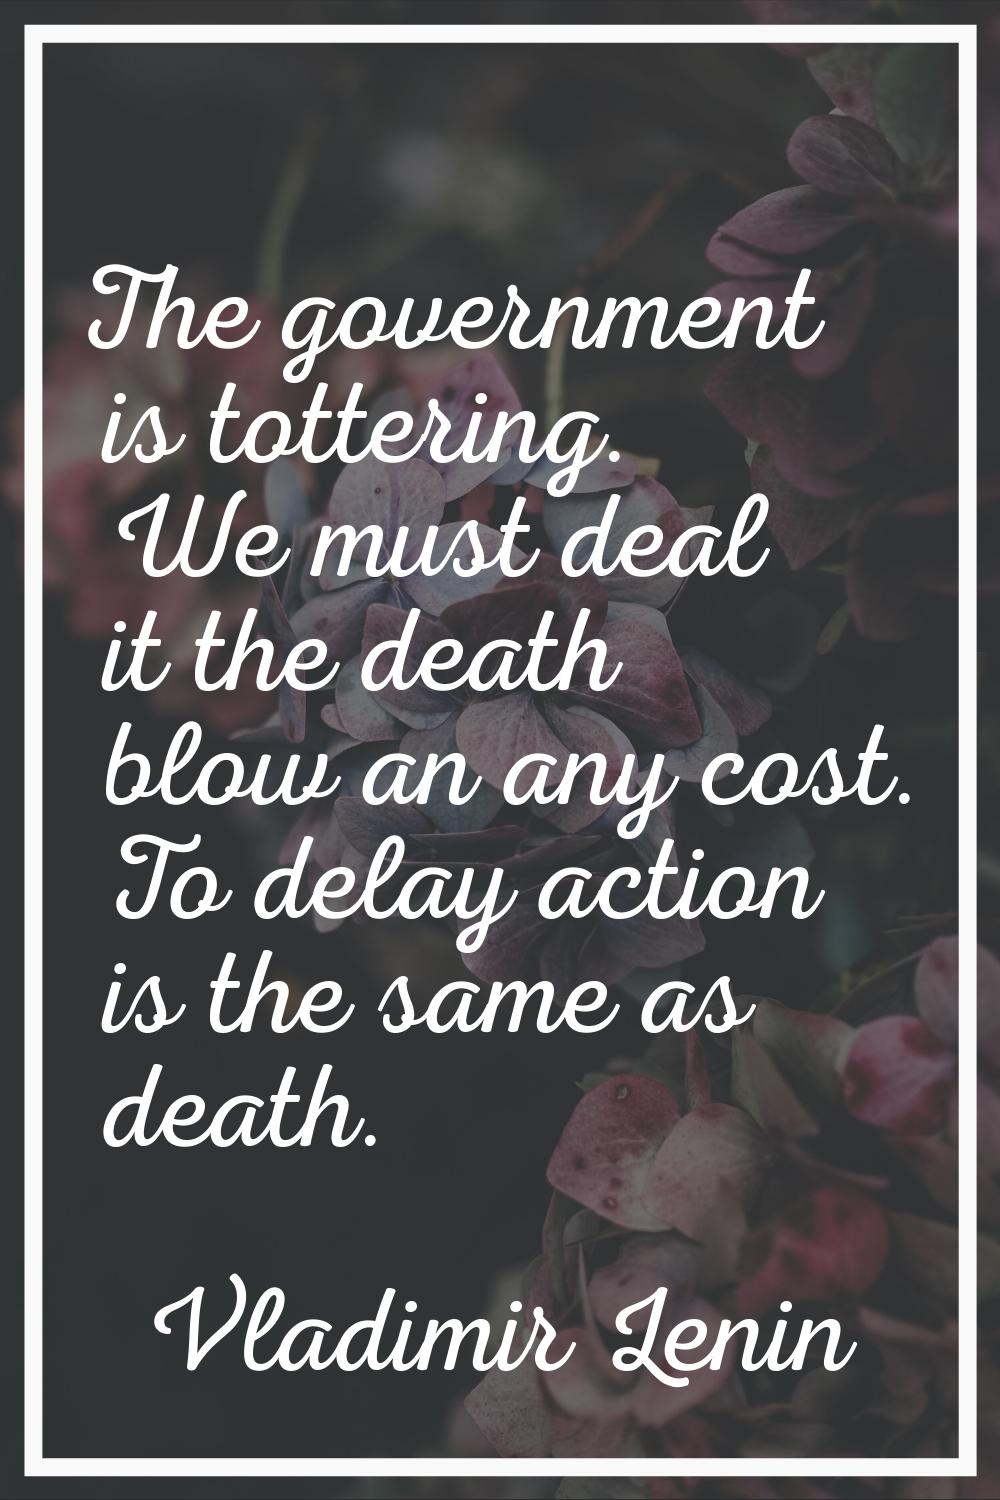 The government is tottering. We must deal it the death blow an any cost. To delay action is the sam